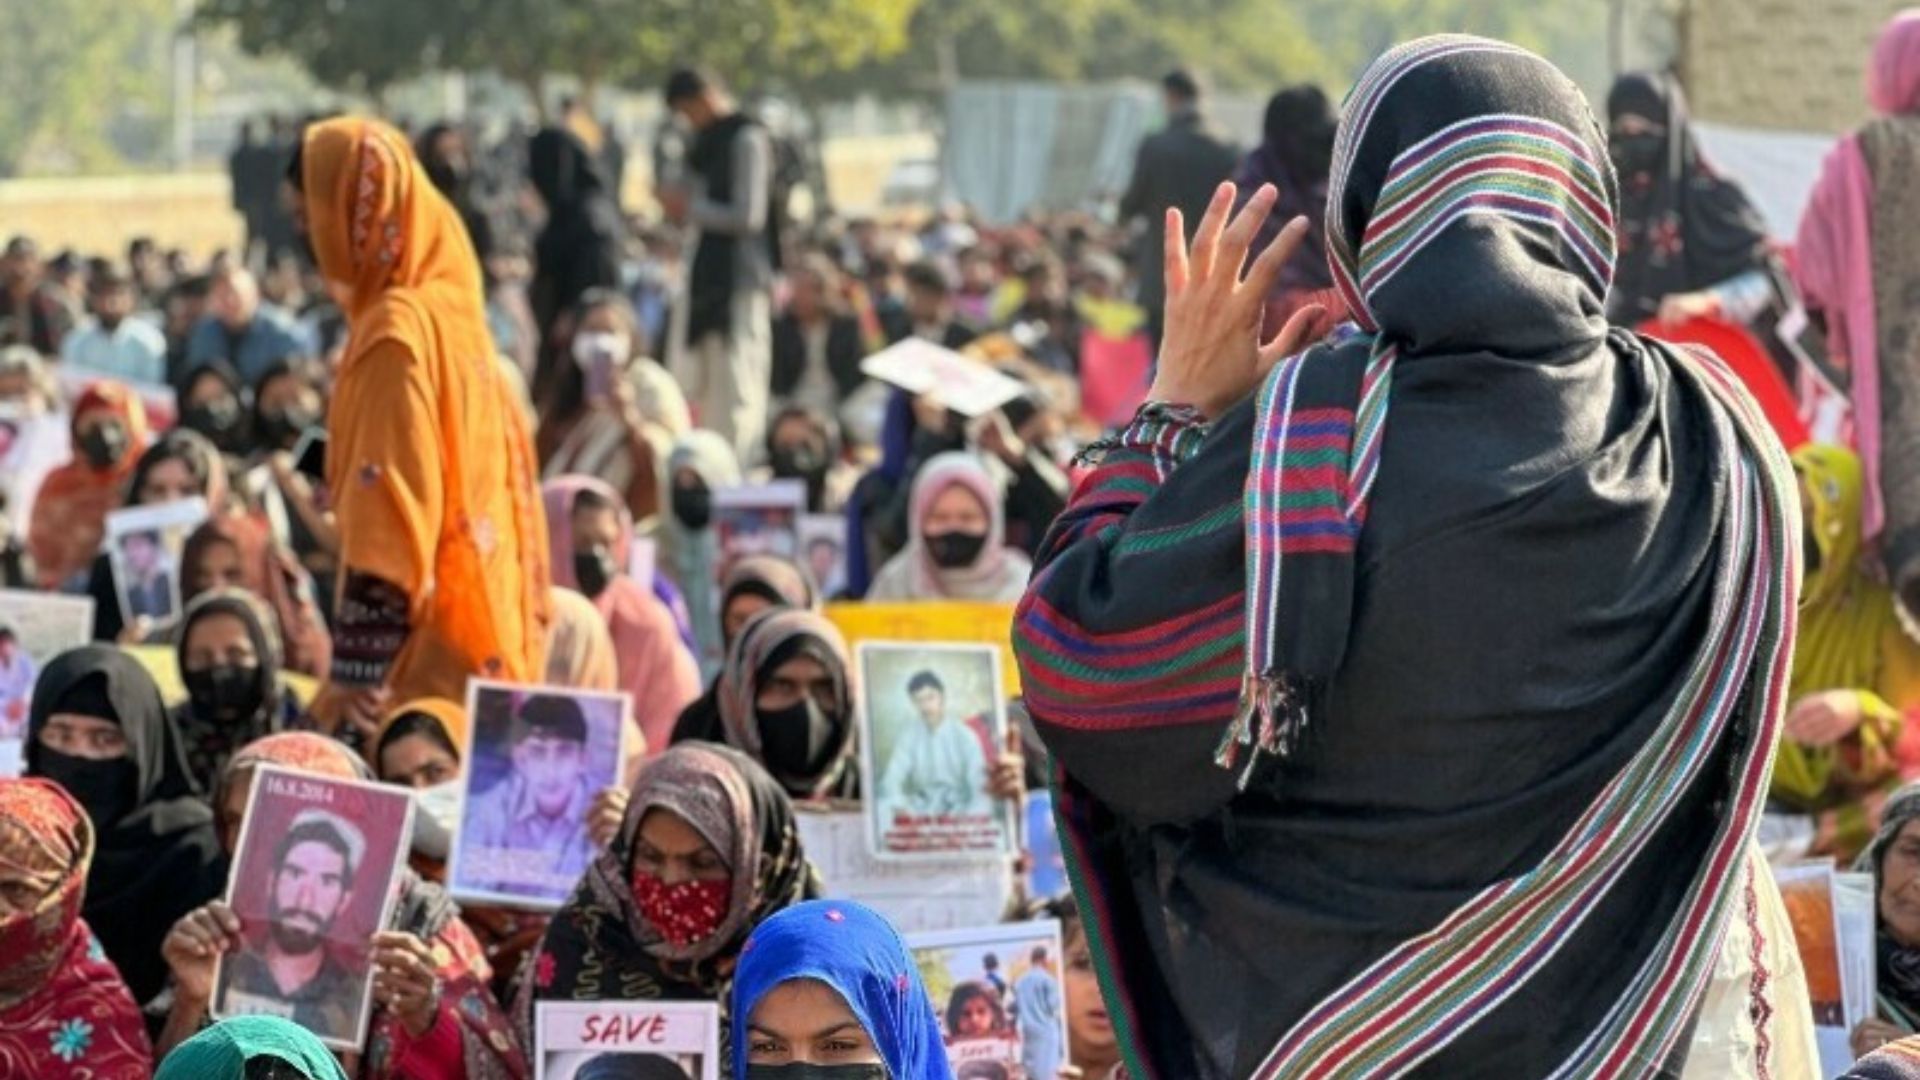 Prominent Baloch Activists Recount the Atrocities Faced by the Baloch community in Pakistan